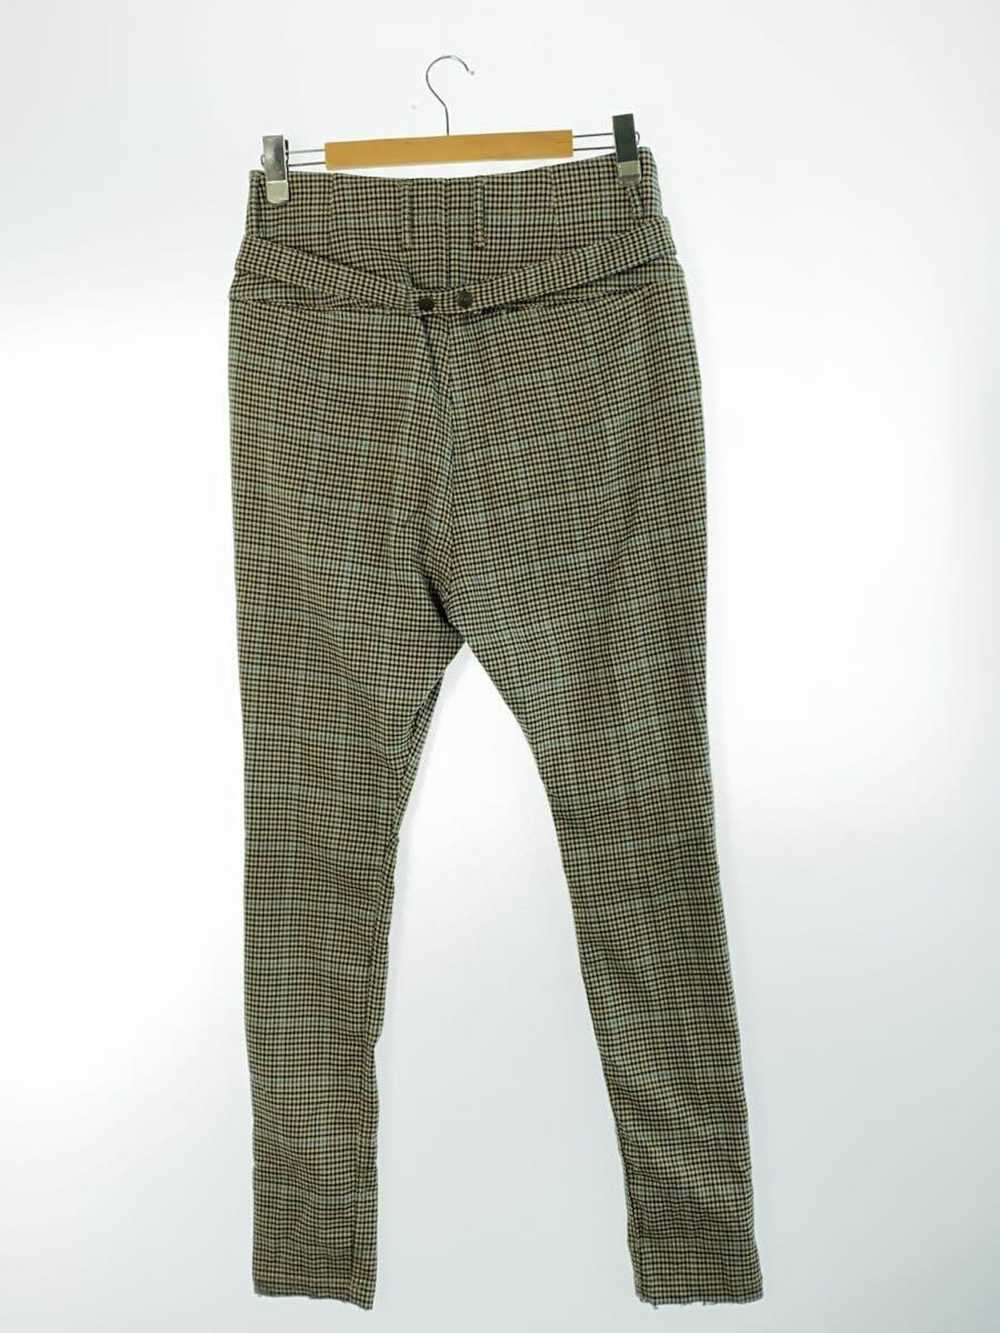 Houndstooth pants Archives - In Spades